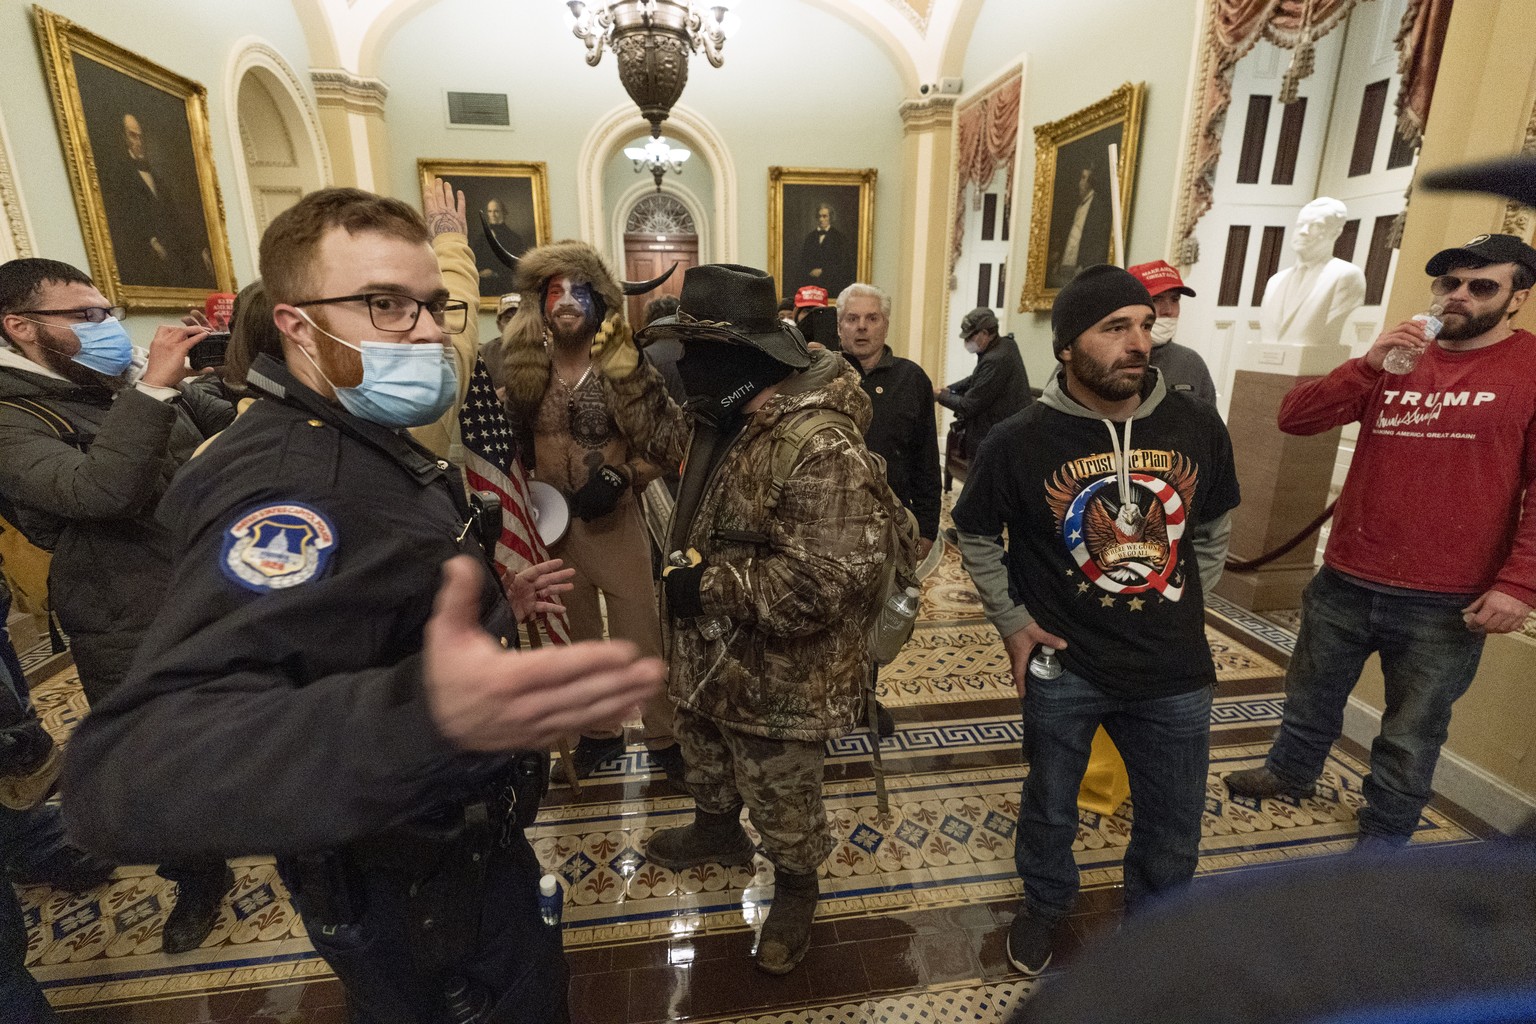 Supporter of President Donald Trump are confronted by Capitol Police officers outside the Senate Chamber at the Capitol, Wednesday, Jan. 6, 2021 in Washington. (AP Photo/Manuel Balce Ceneta)